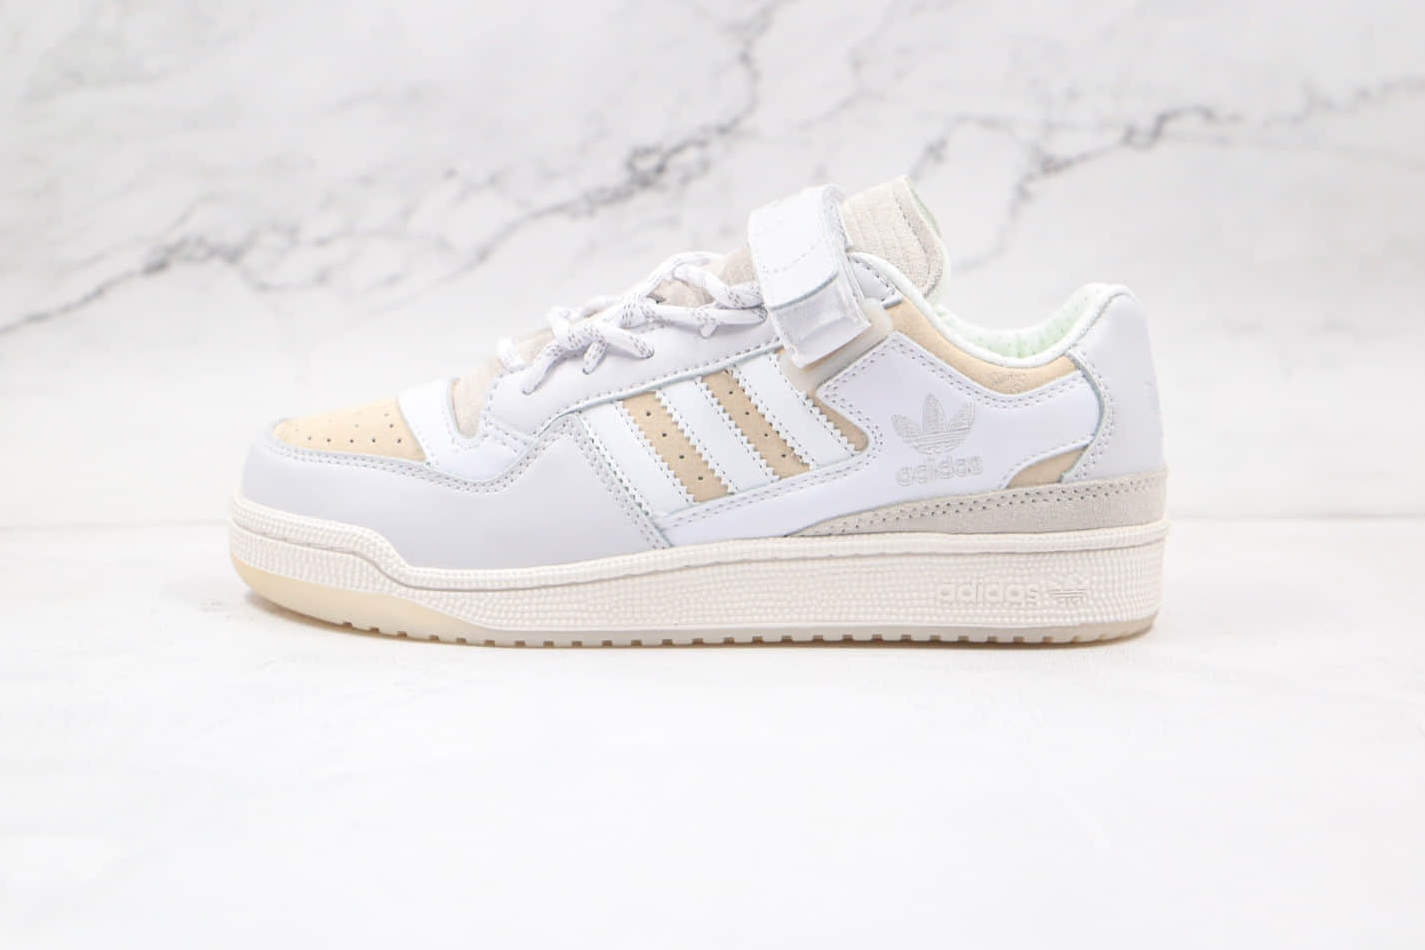 Adidas Ivy Park x Forum Low 'White' FZ4389 - Iconic Collaboration Sneaker